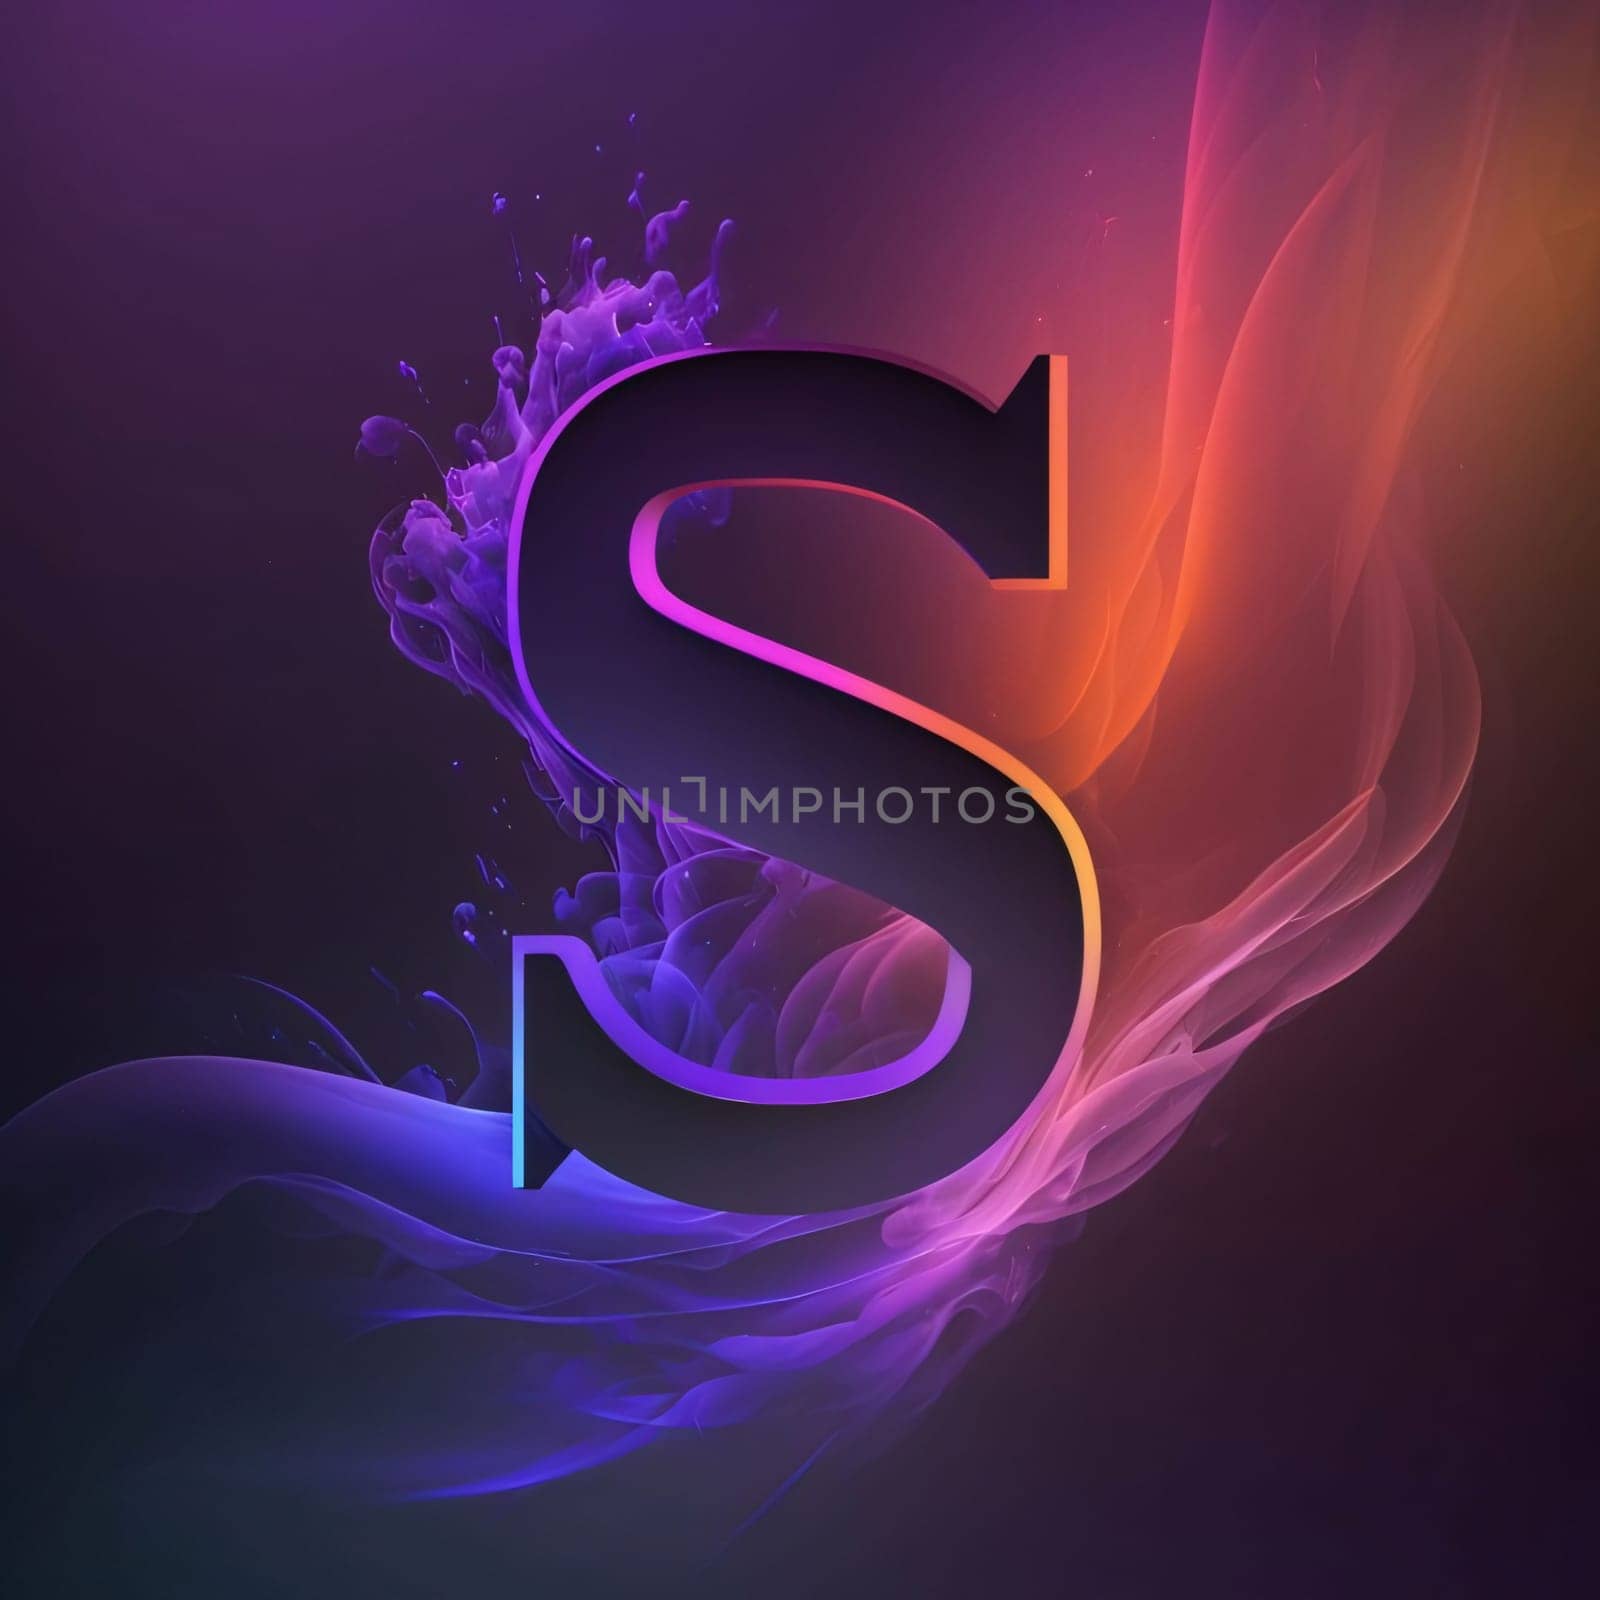 Graphic alphabet letters: Illustration of a letter S in the form of an abstract smoke